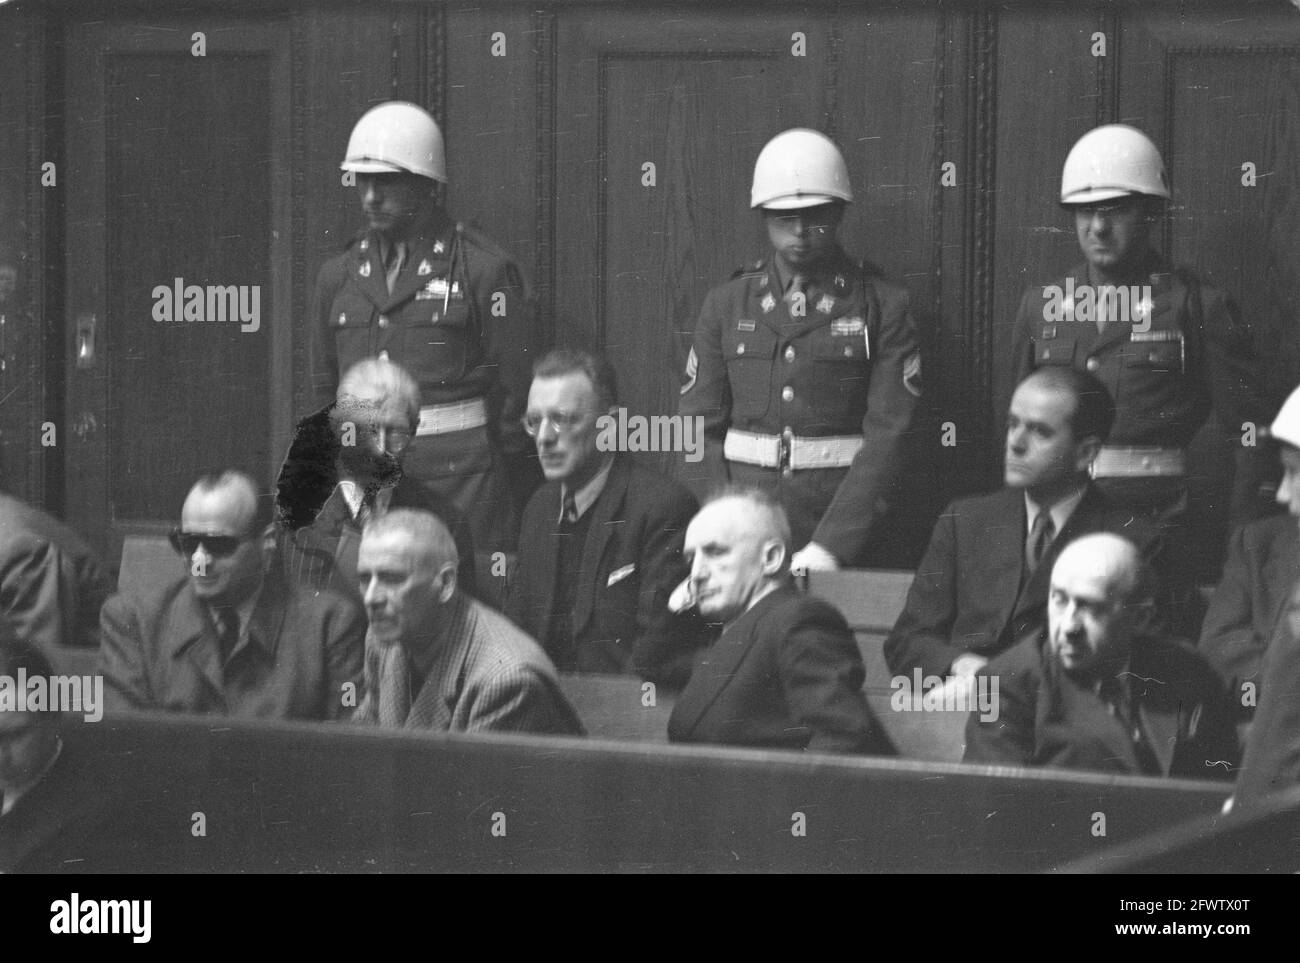 Nuremberg Trial. The defendants. Back row; Von Papen, Seyss-Inquart, Speer. Front row Franck, Frick, Streicher and Funck, December 4, 1945, war criminals, trials, justice, second world war, The Netherlands, 20th century press agency photo, news to remember, documentary, historic photography 1945-1990, visual stories, human history of the Twentieth Century, capturing moments in time Stock Photo